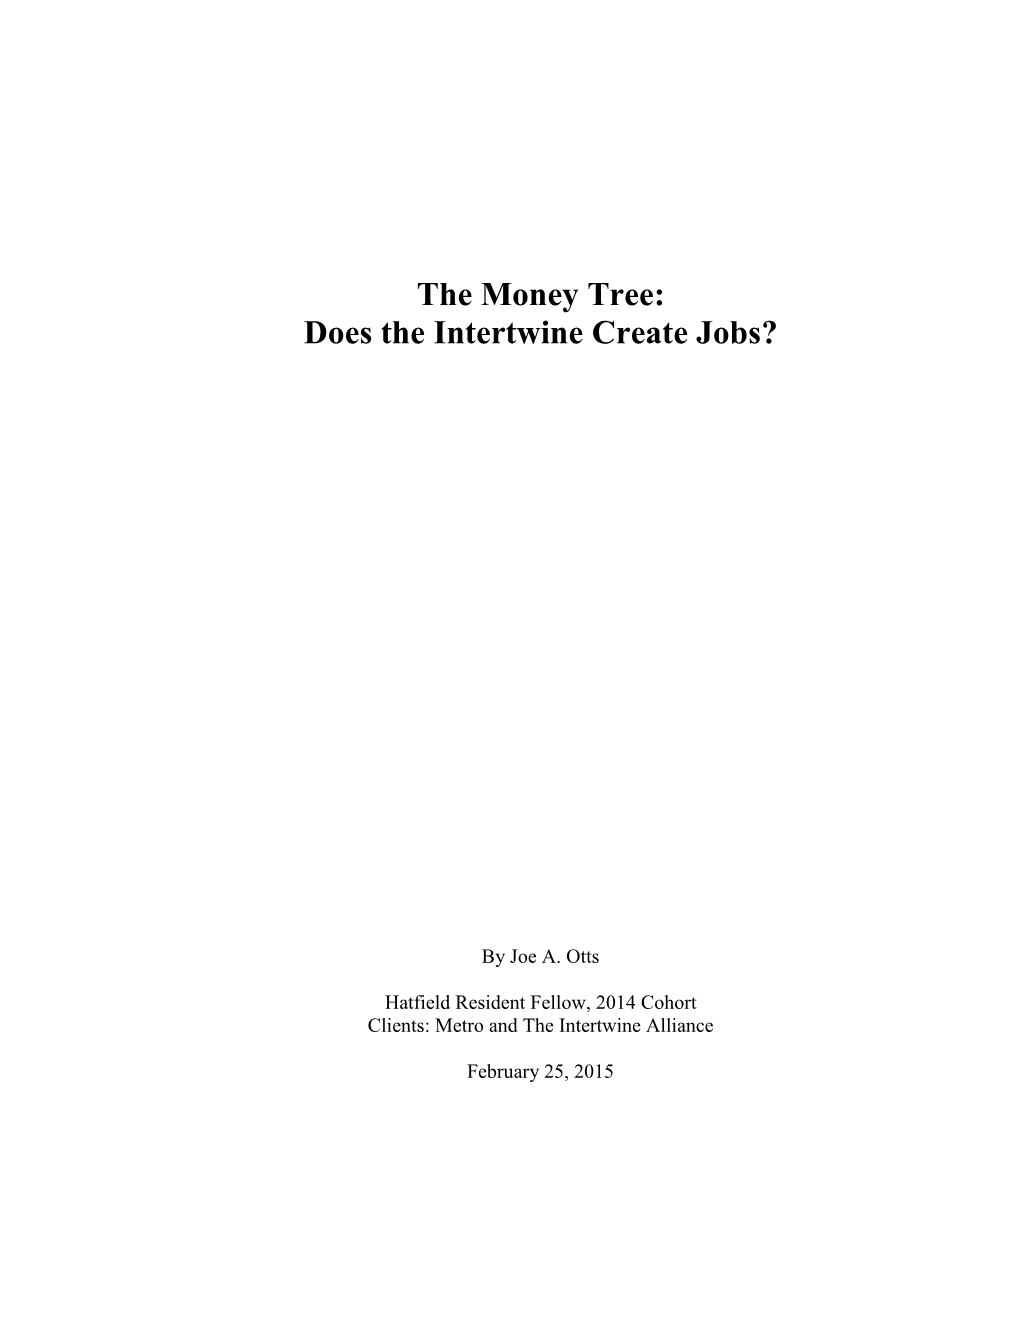 The Money Tree: Does the Intertwine Create Jobs?